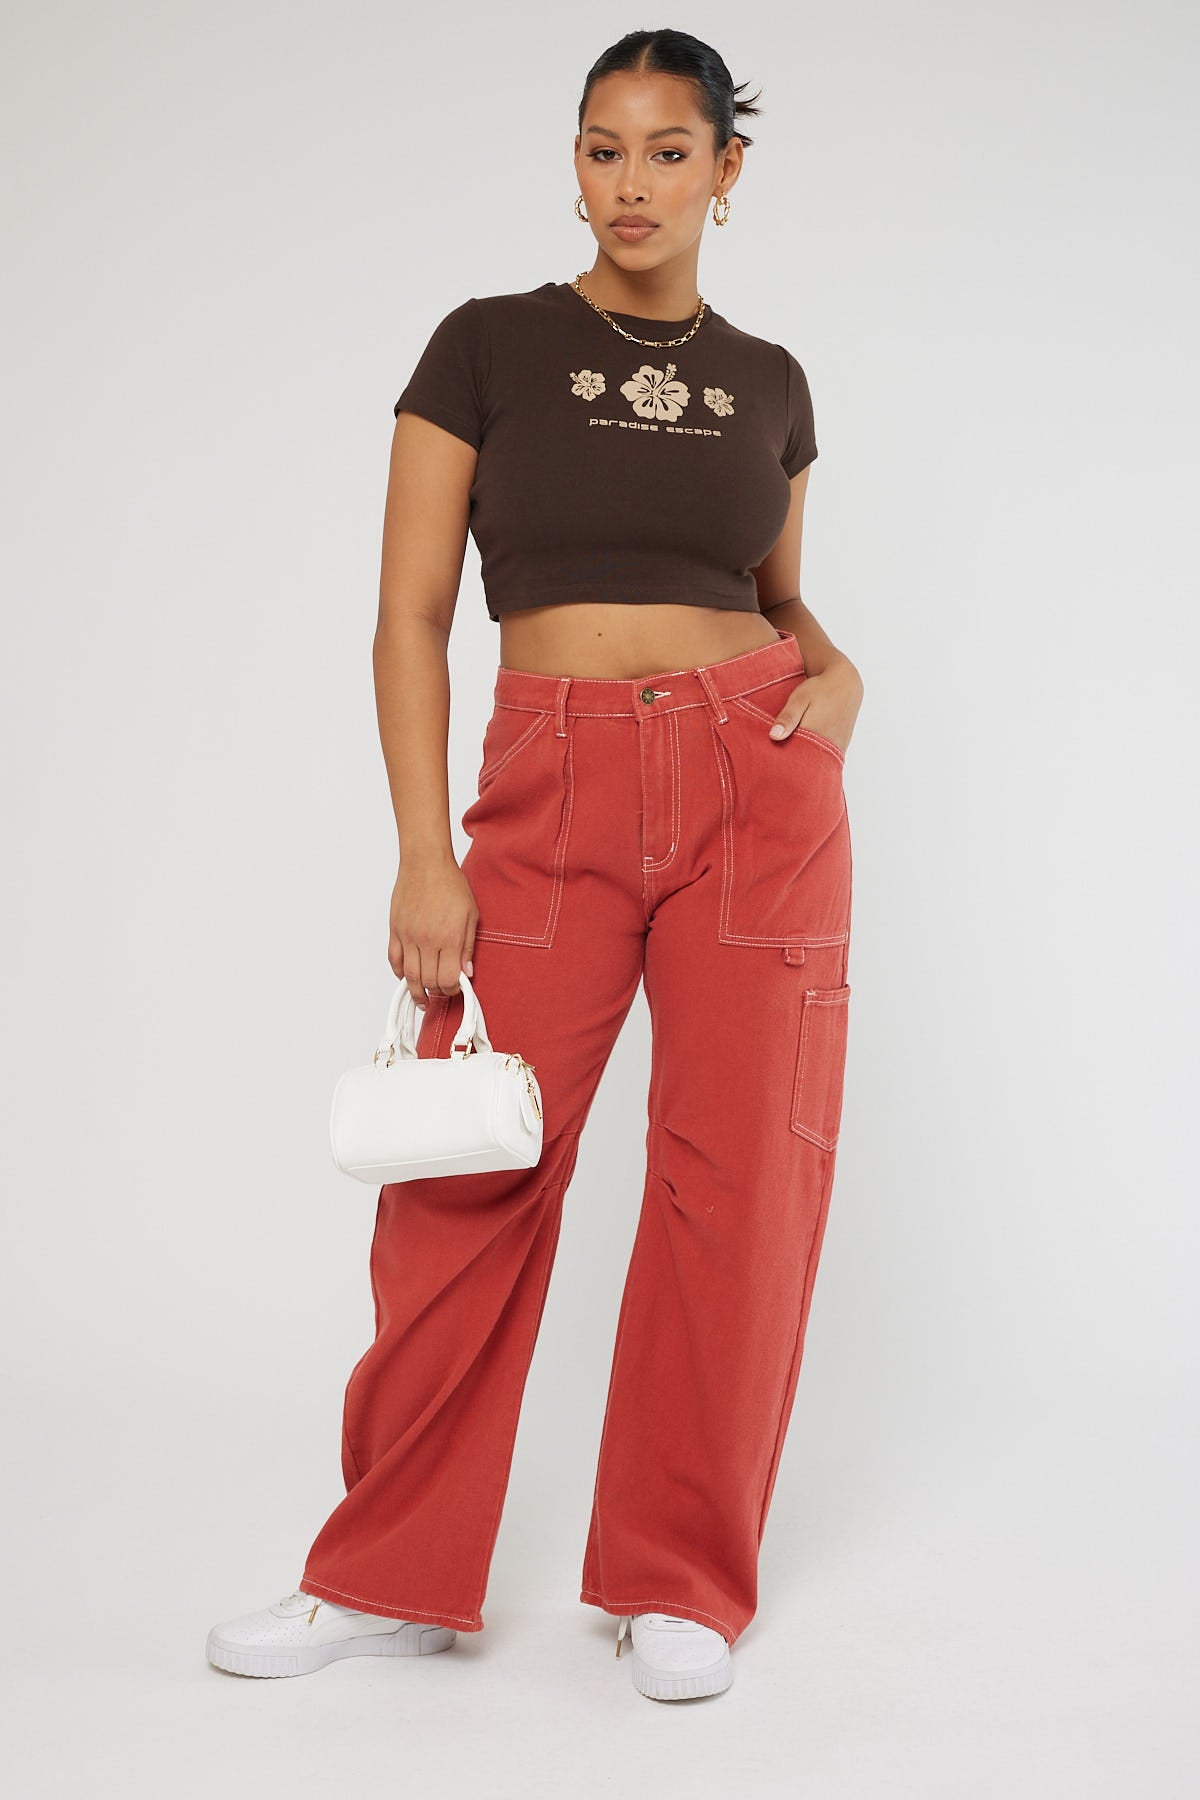 Lioness Miami Vice Pant Red